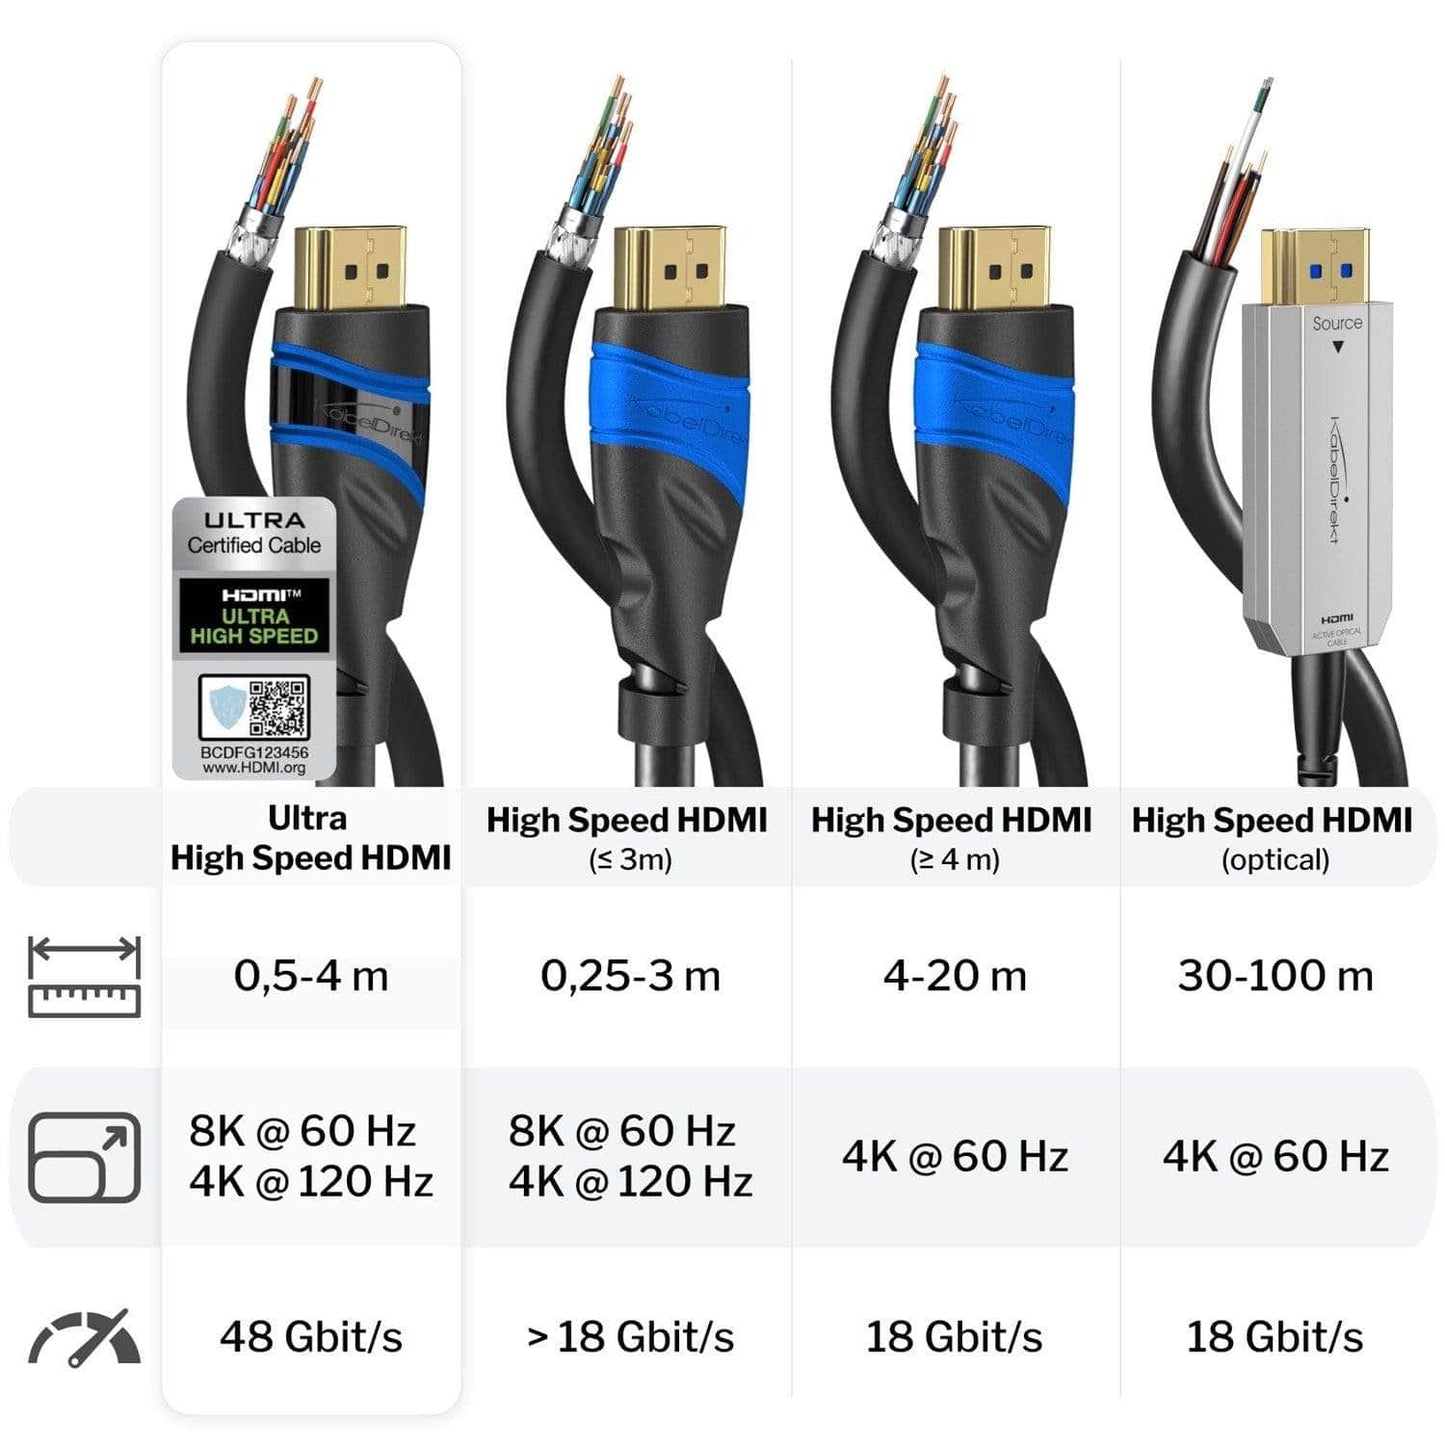 8K Ultra High Speed HDMI 2.1 Cable – 8K@60Hz - officially tested and certified